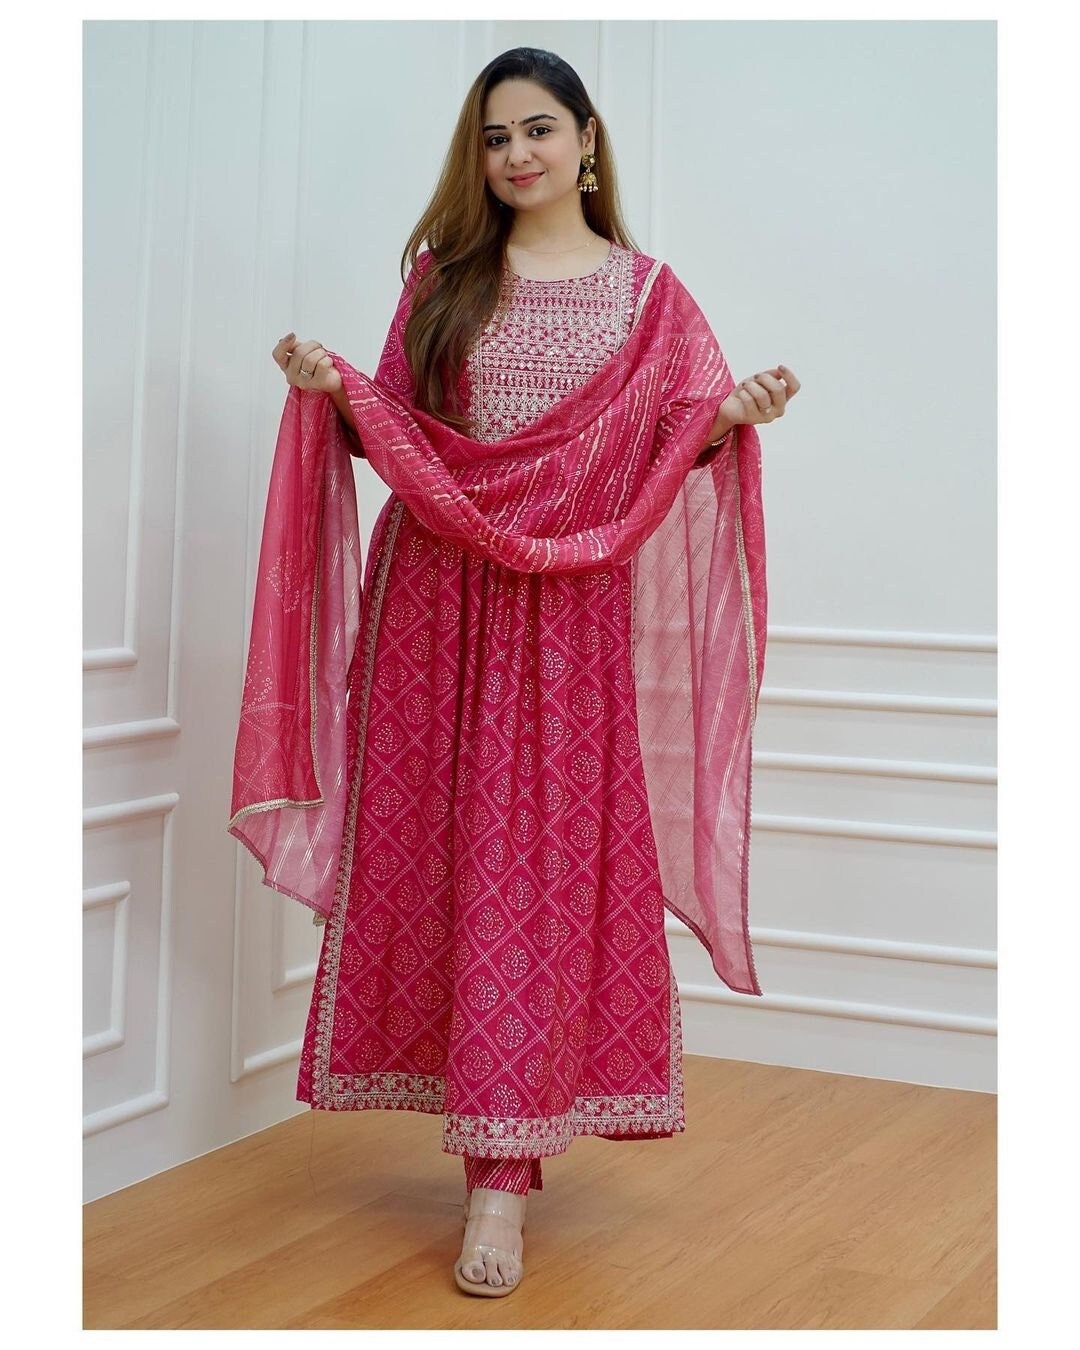 Pink Color Designer Anarkali Suit With Heavy Embroidery Work and Dupatta in  USA, UK, Malaysia, South Africa, Dubai, Singapore